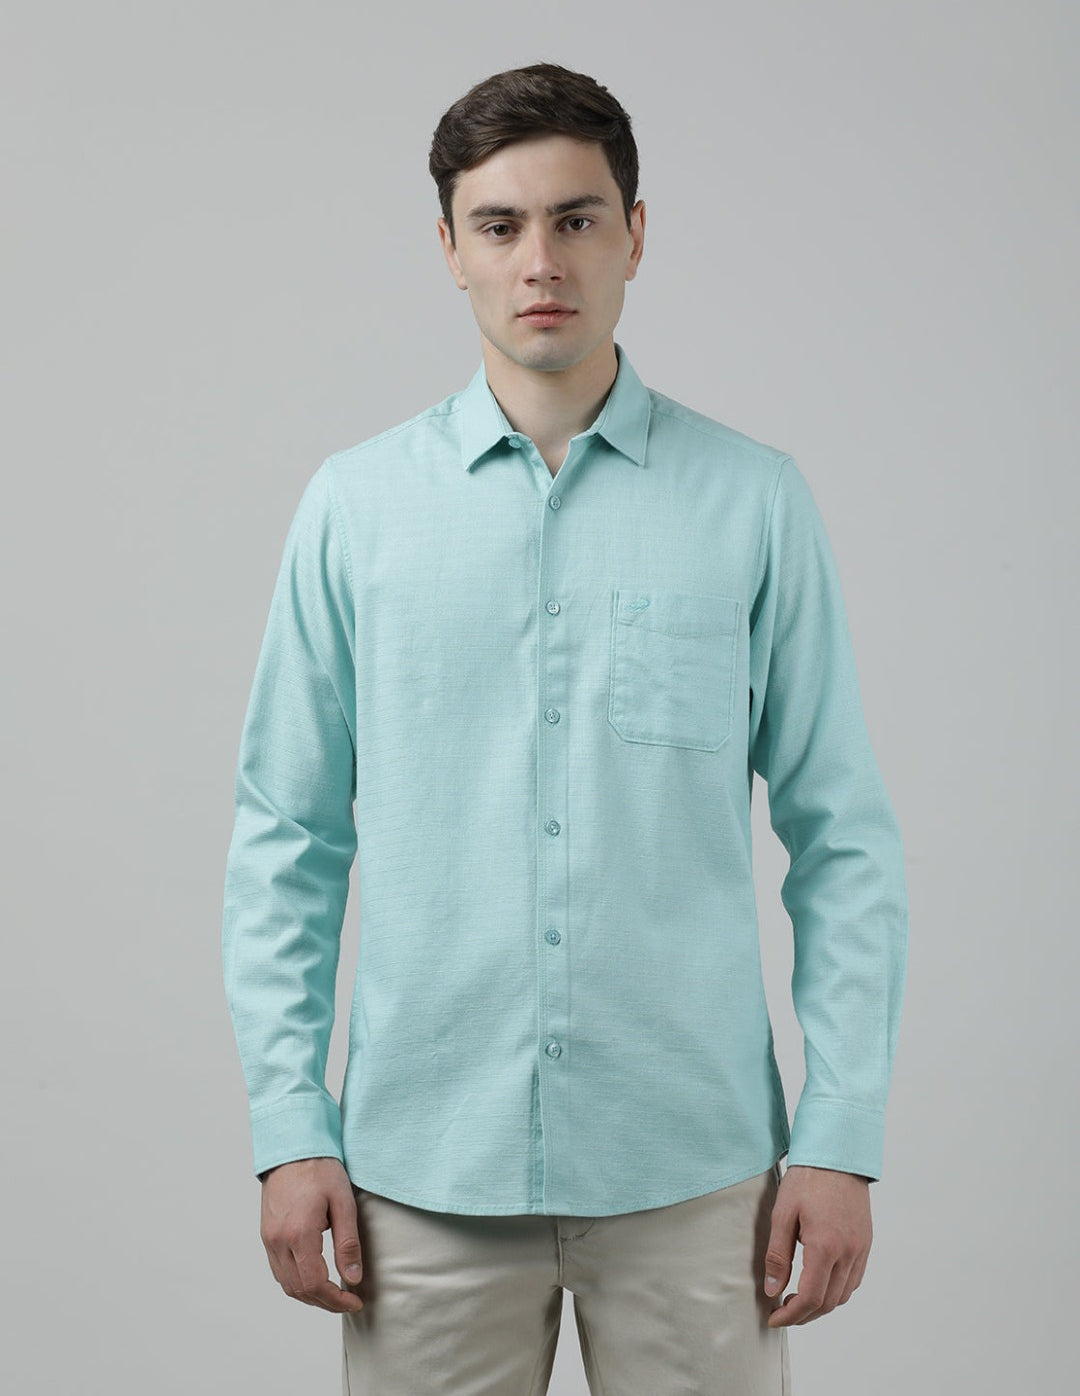 Casual Aqua Full Sleeve Comfort Fit Solid Shirt with Collar for Men